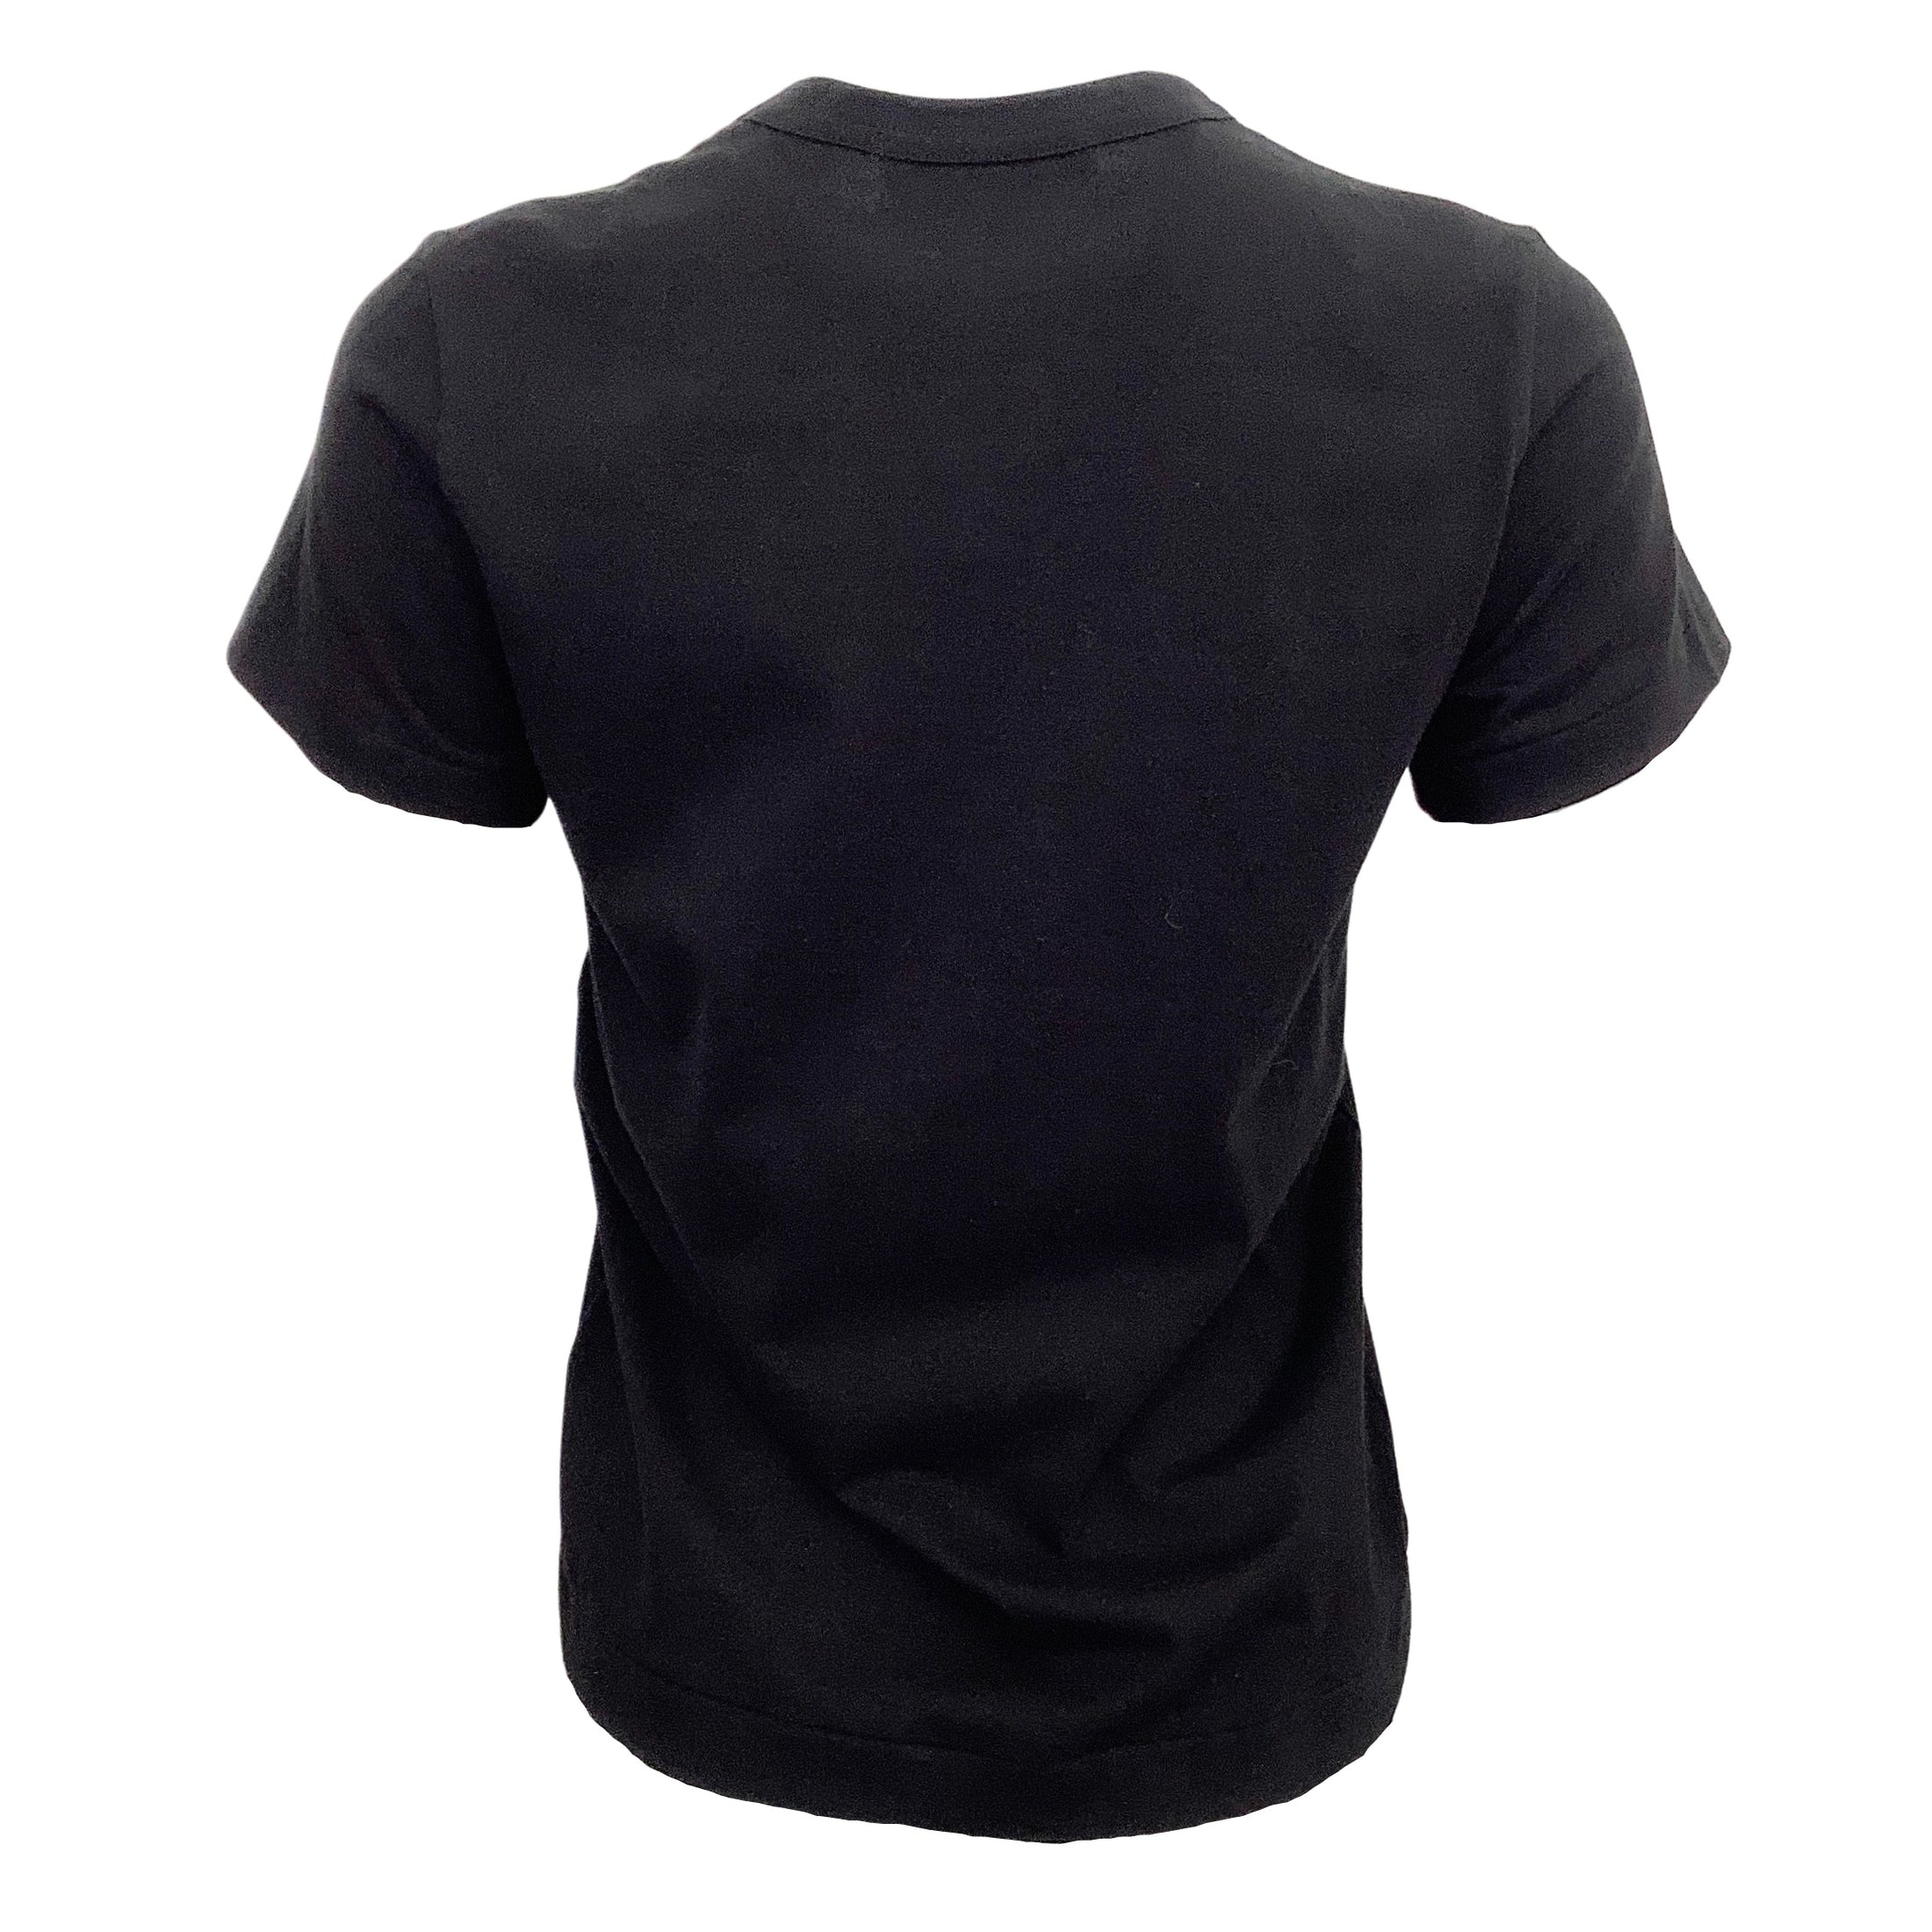 Comme des Garcons Black Cotton Short Sleeve Tee with Pearl Necklace Detail